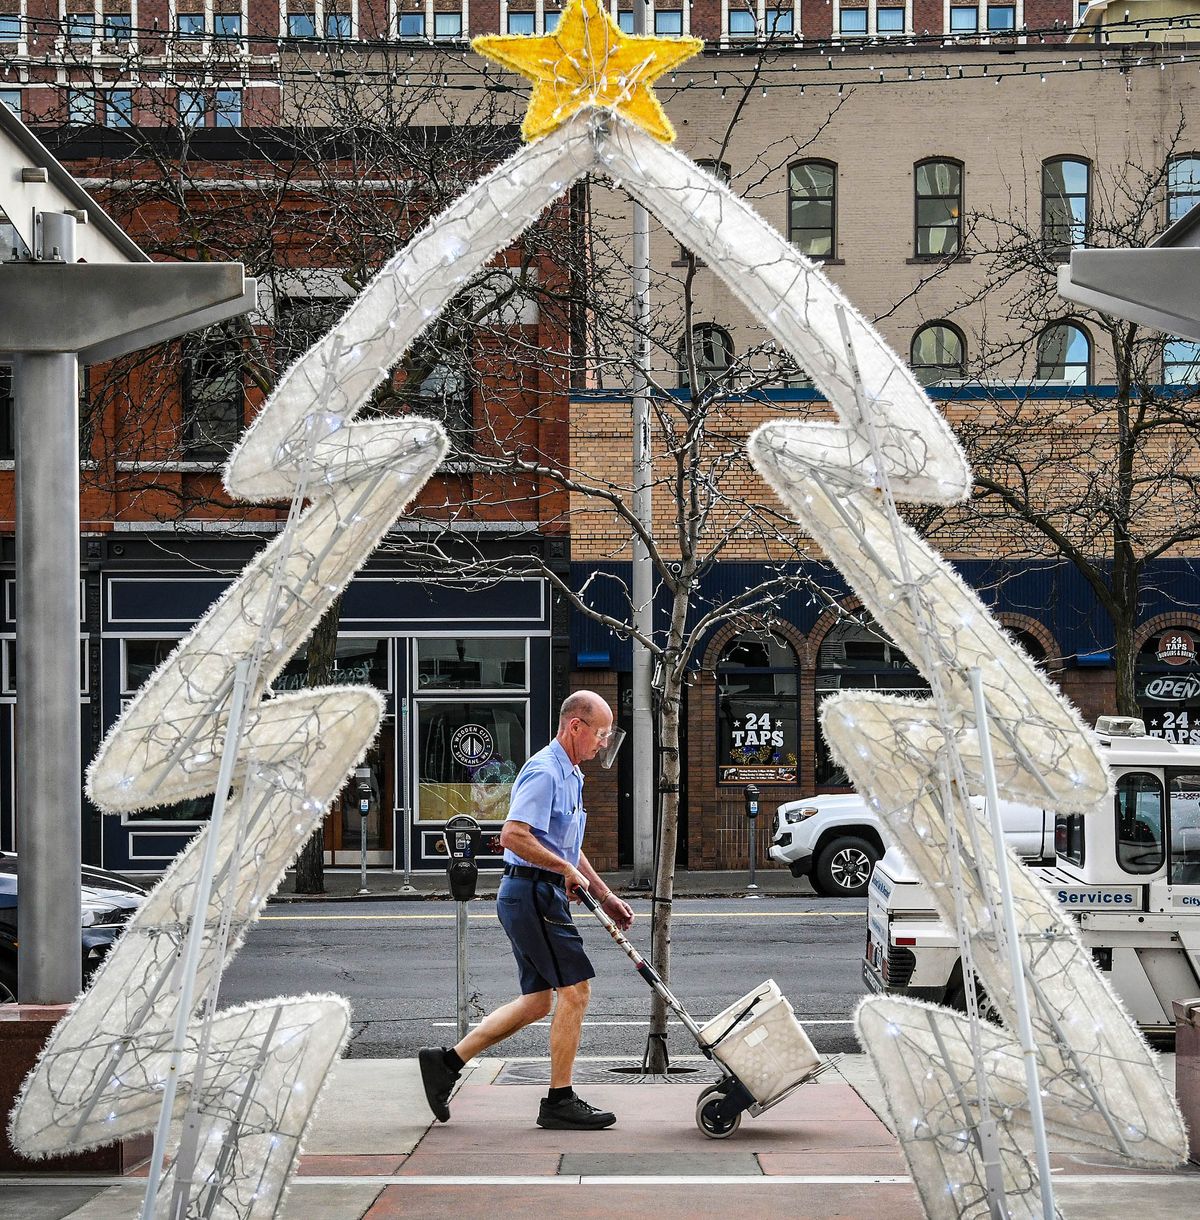 Letter carrier Pete Michalowicz makes his way past the Lincoln Building’s holiday decoration and back to the downtown post office after working his route wearing shorts as temperatures neared 60 degrees Wednesday afternoon in Spokane. Michalowicz said he has been dressed like this since 1999.  (DAN PELLE/THE SPOKESMAN-REVIEW)